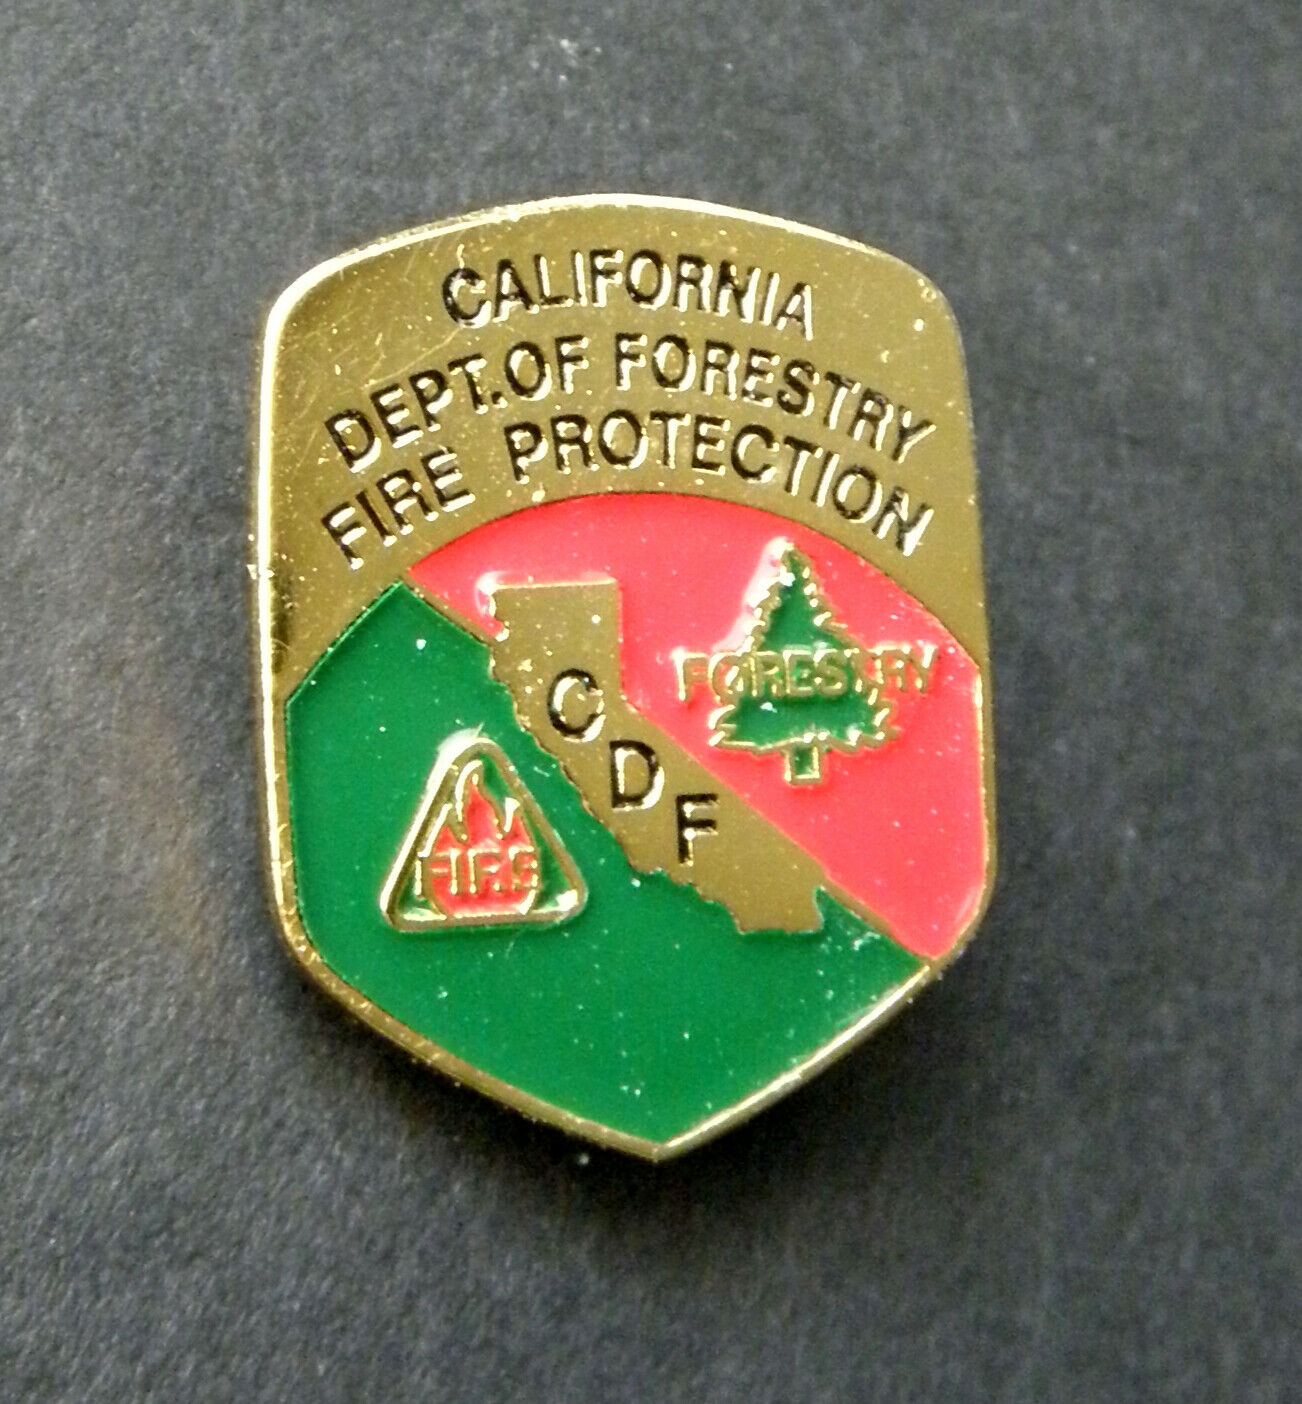 California Department of Forestry and Fire Protection shield badge PIN CDF